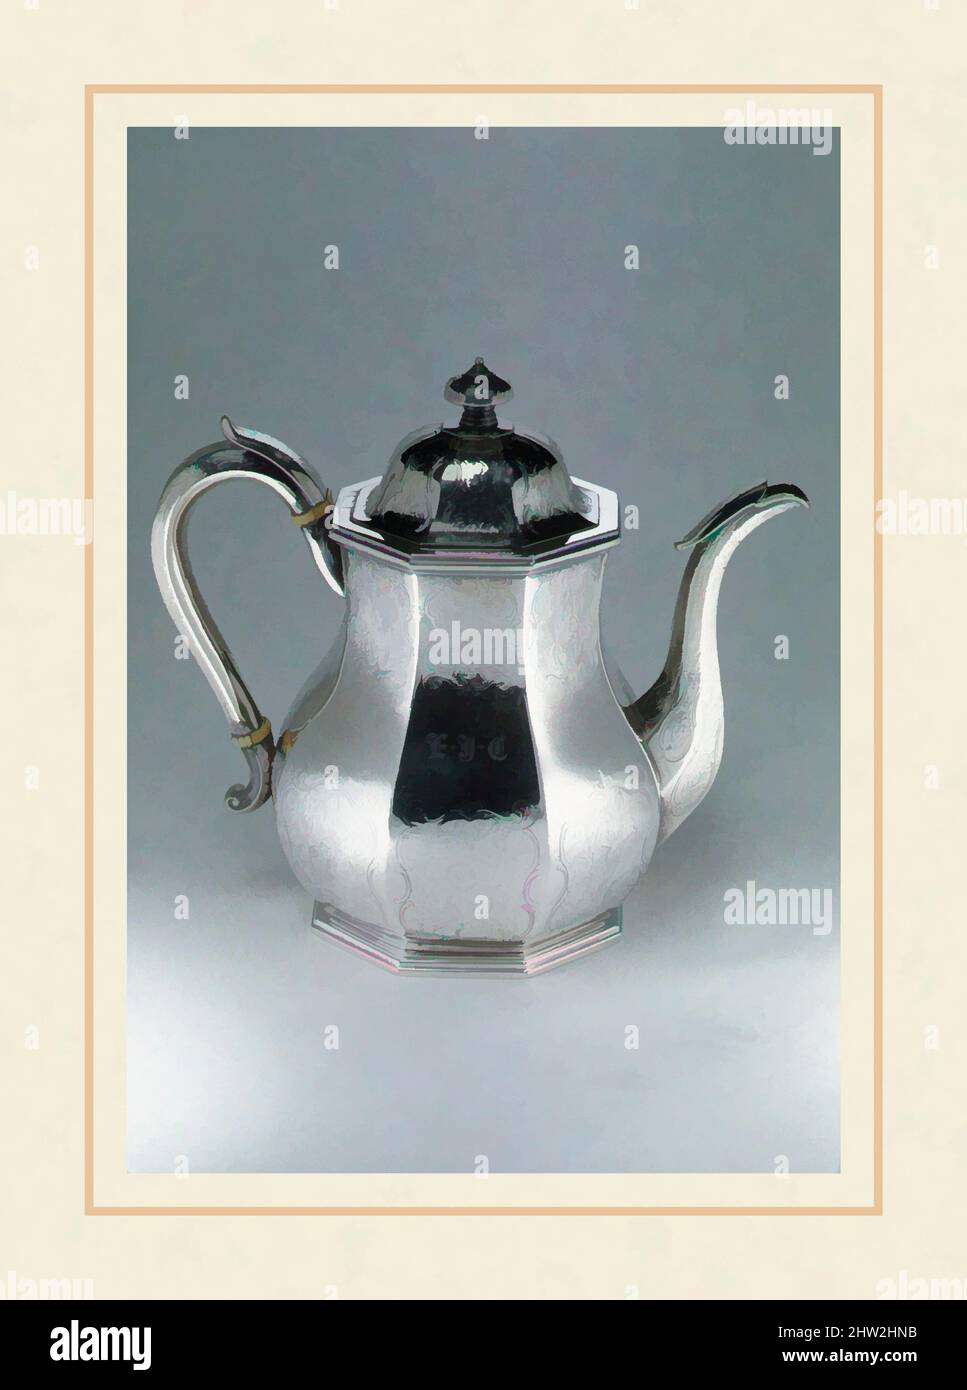 Art inspired by Teapot, ca. 1840, Made in New York, New York, United States, American, Silver, Overall: 7 15/16 x 8 13/16 x 5 3/8 in. (20.2 x 22.4 x 13.7 cm); 27 oz. 3 dwt. (844.9 g), Silver, William Forbes (baptized 1799, active New York, 1826–63, Classic works modernized by Artotop with a splash of modernity. Shapes, color and value, eye-catching visual impact on art. Emotions through freedom of artworks in a contemporary way. A timeless message pursuing a wildly creative new direction. Artists turning to the digital medium and creating the Artotop NFT Stock Photo